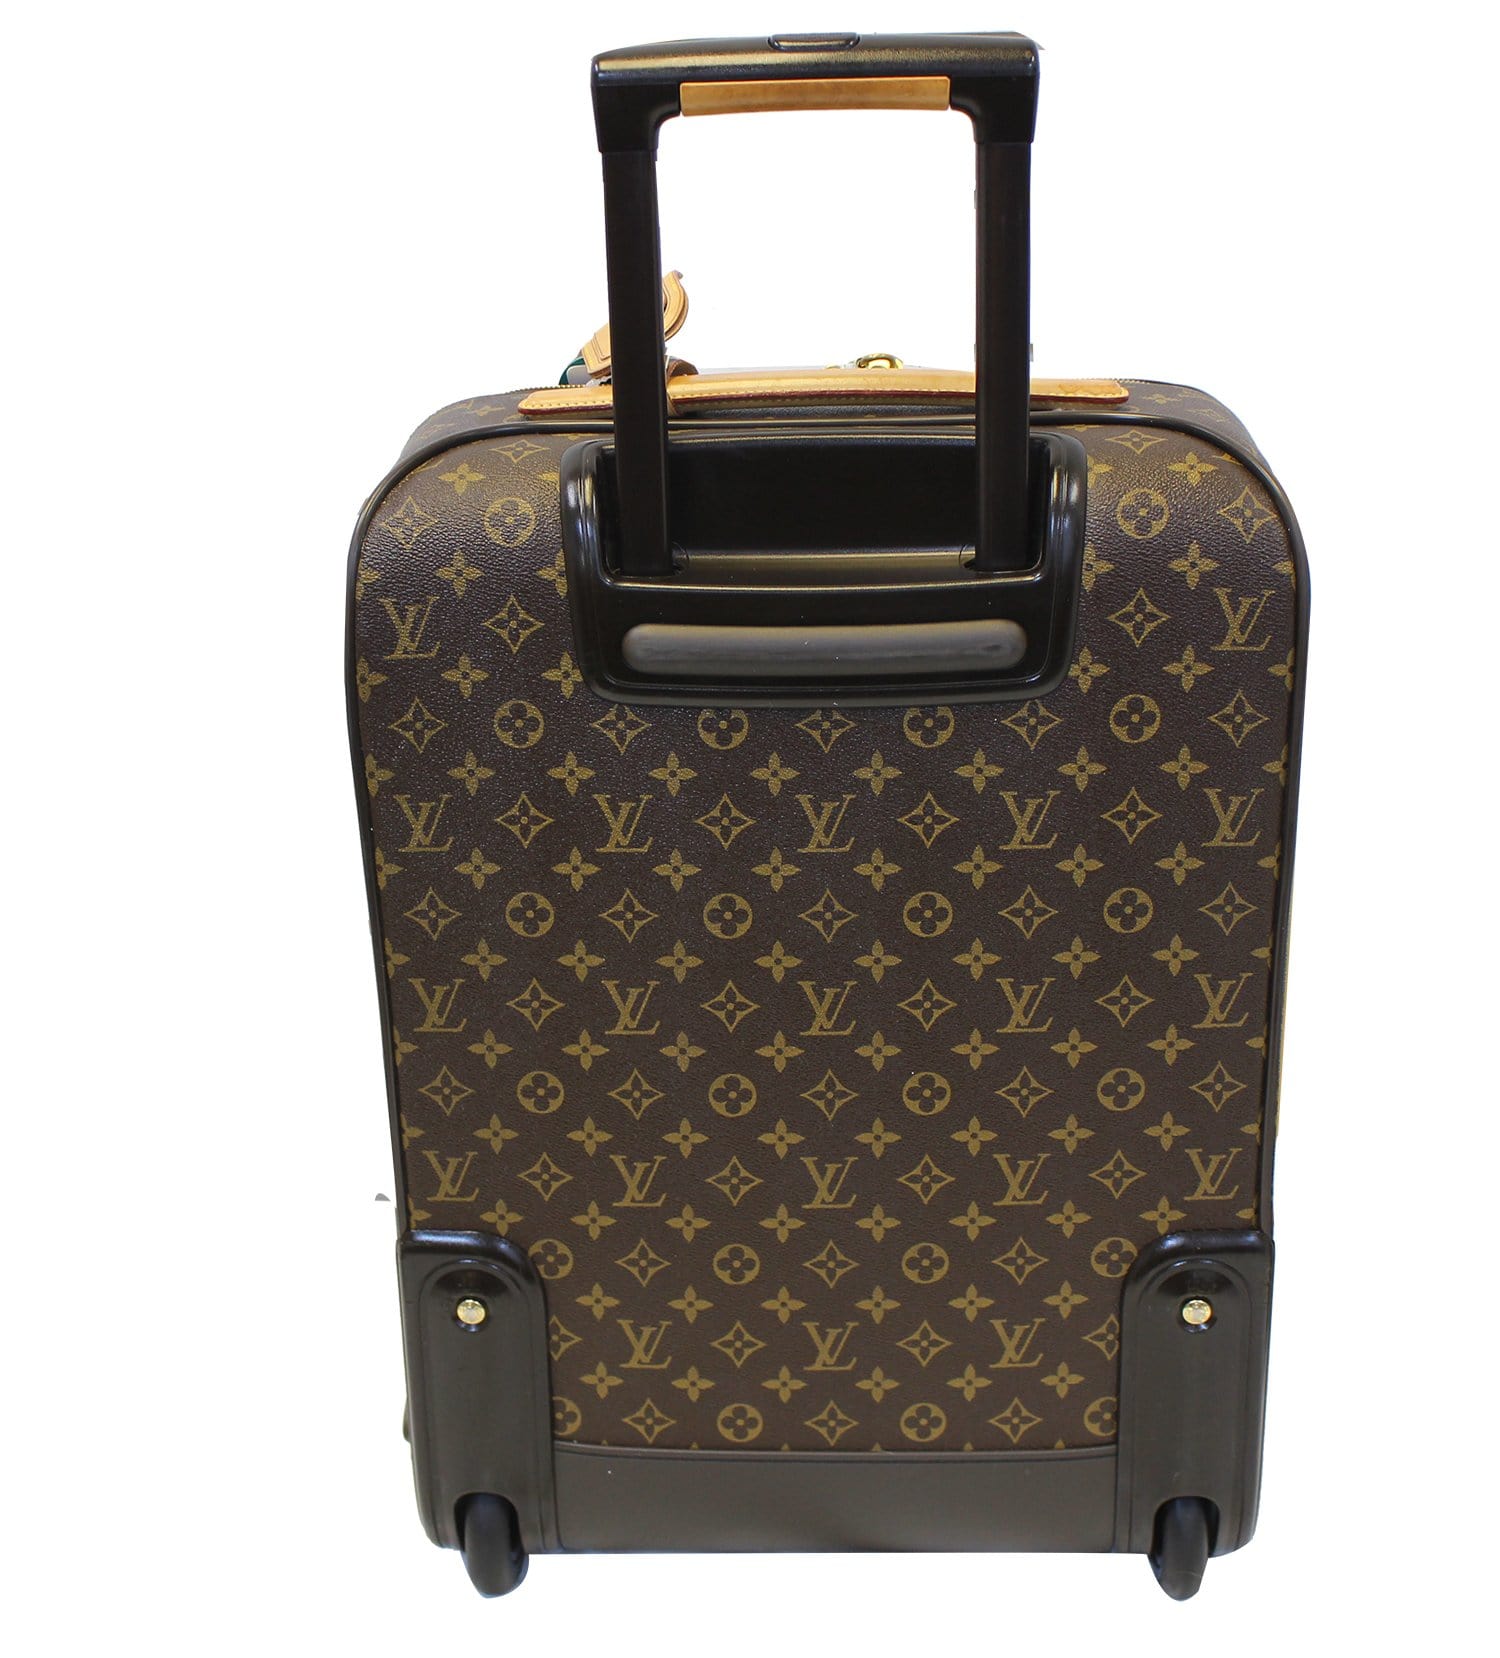 Louis Vuitton - The Shopping Bag and Trolley by Christian